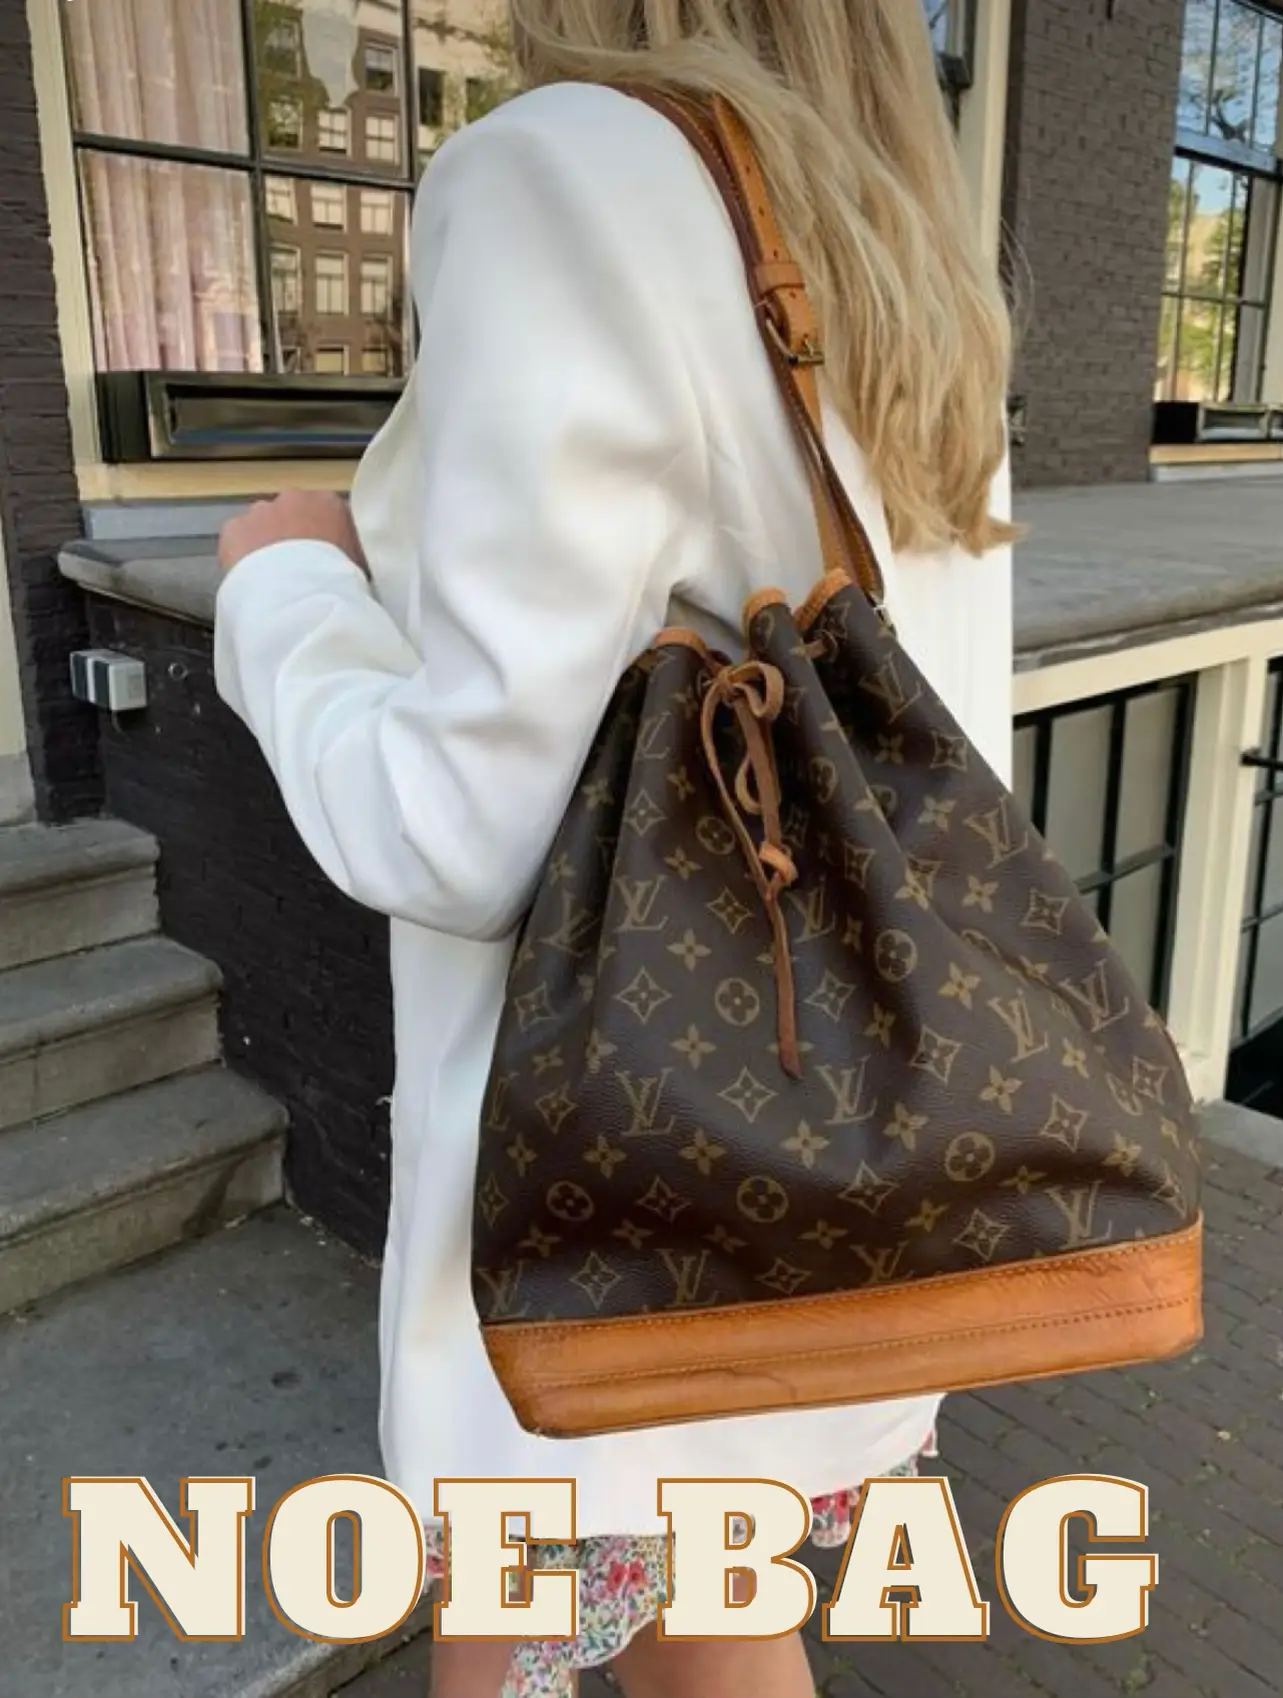 I NEVER KNEW!!! Omg two bags in one, that's a W for me! #louisvuitton